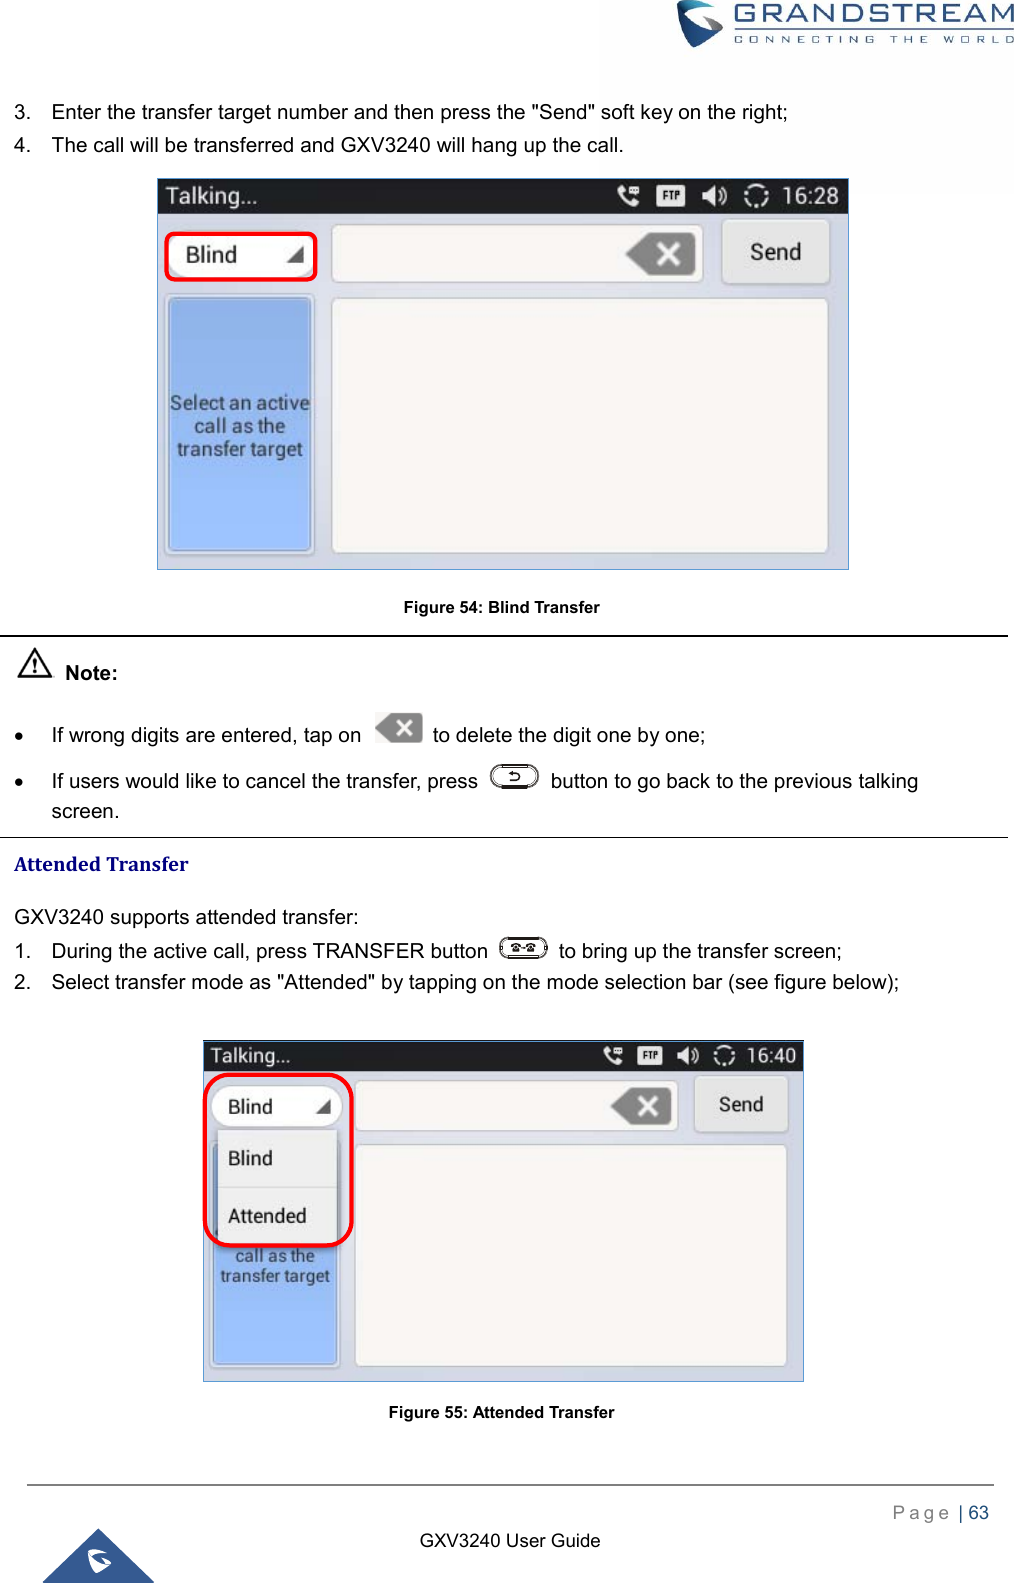    P a g e  | 63    GXV3240 User Guide  3.  Enter the transfer target number and then press the &quot;Send&quot; soft key on the right; 4.  The call will be transferred and GXV3240 will hang up the call.  Figure 54: Blind Transfer   Note:   If wrong digits are entered, tap on    to delete the digit one by one;   If users would like to cancel the transfer, press    button to go back to the previous talking screen. Attended Transfer GXV3240 supports attended transfer: 1.  During the active call, press TRANSFER button    to bring up the transfer screen; 2.  Select transfer mode as &quot;Attended&quot; by tapping on the mode selection bar (see figure below);   Figure 55: Attended Transfer 